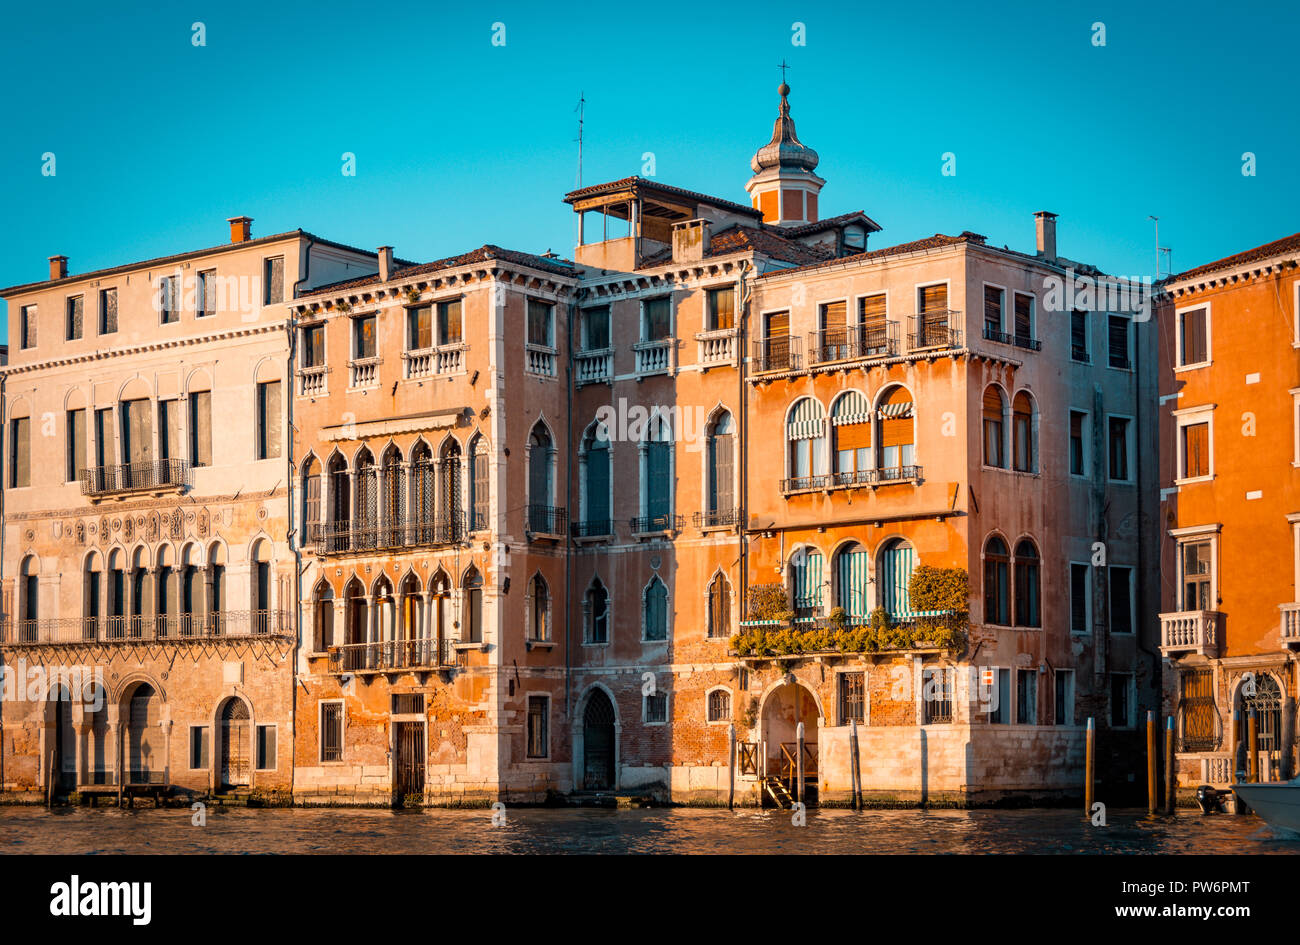 Ancient palaces in Grand canal waters of Venice Italy. Orange and teal view. Stock Photo